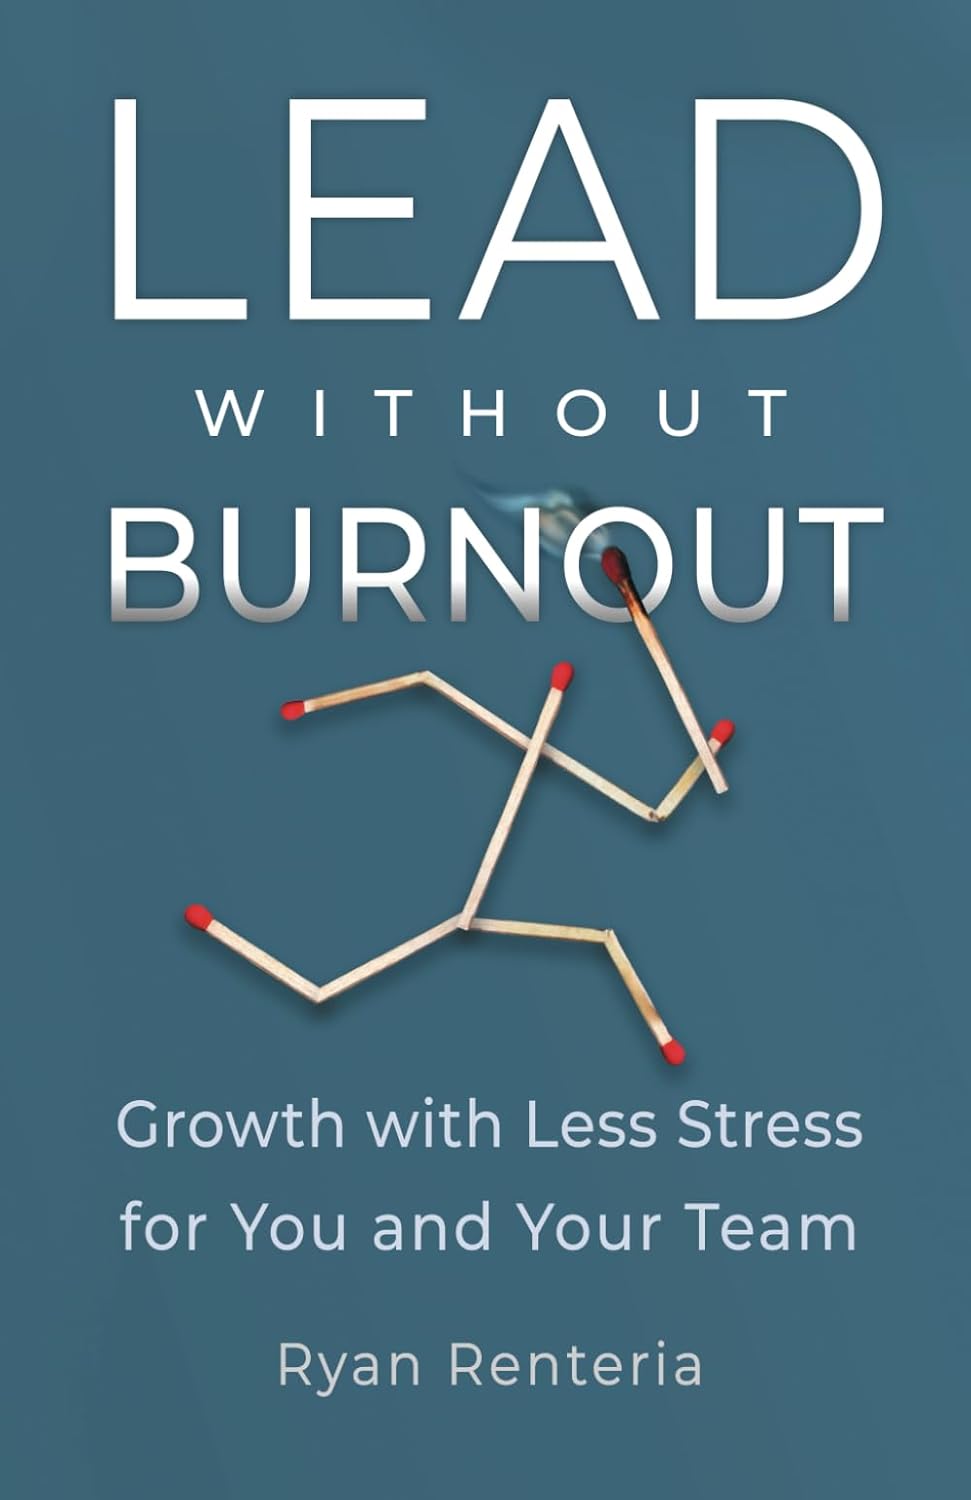 Lead without Burnout: Growth with Less Stress for You and Your Team